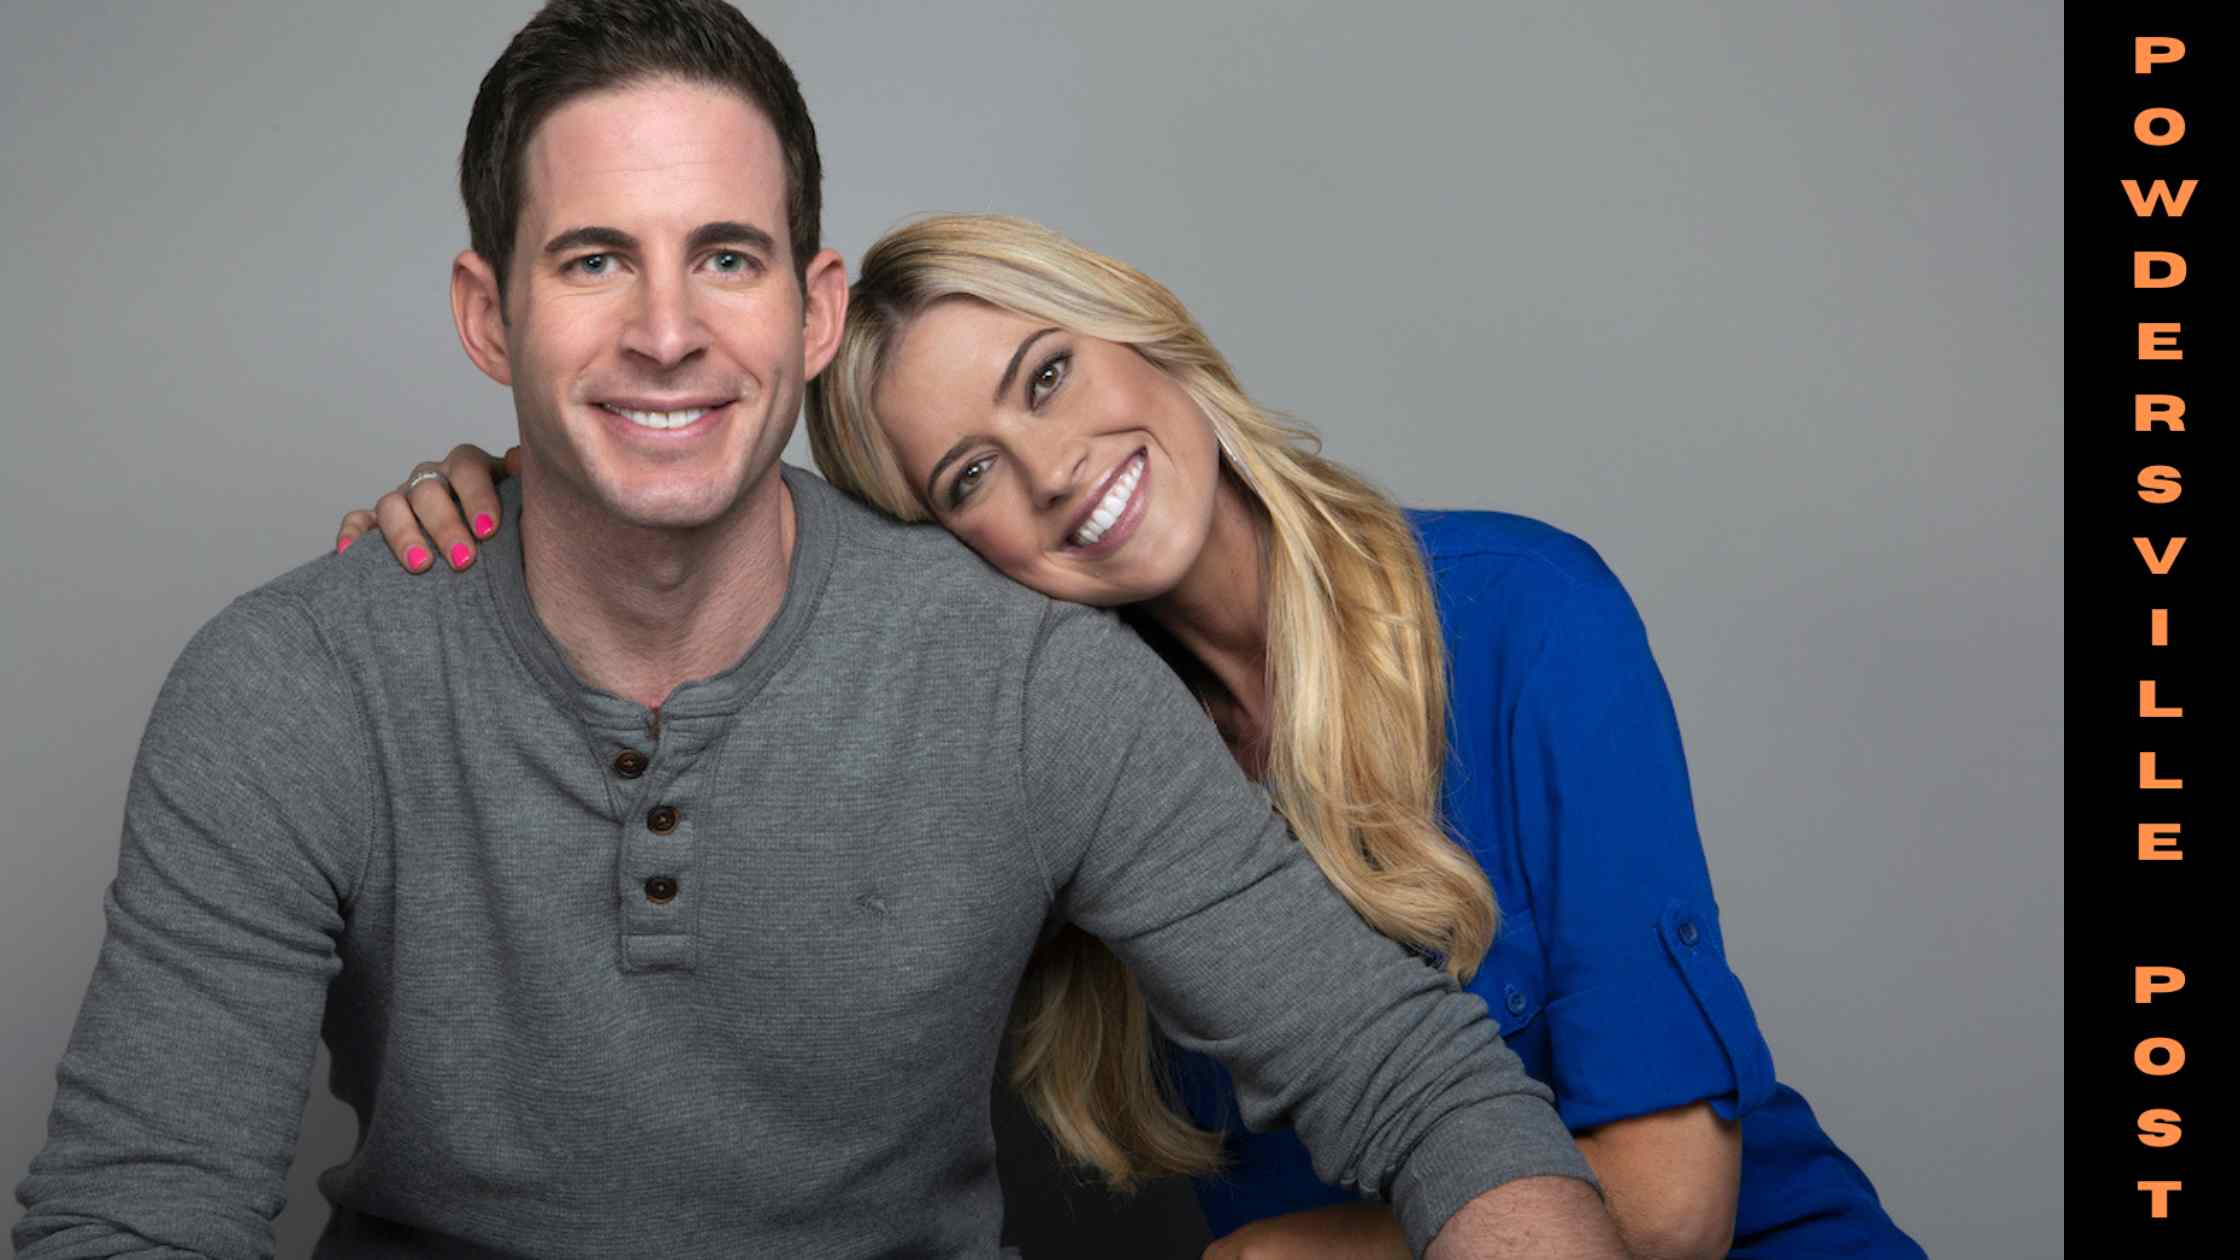 Christina Haack and Tarek El Moussa Agreed They Not Go Forward With Another Season Of Their Show 'Flip Or Flop'